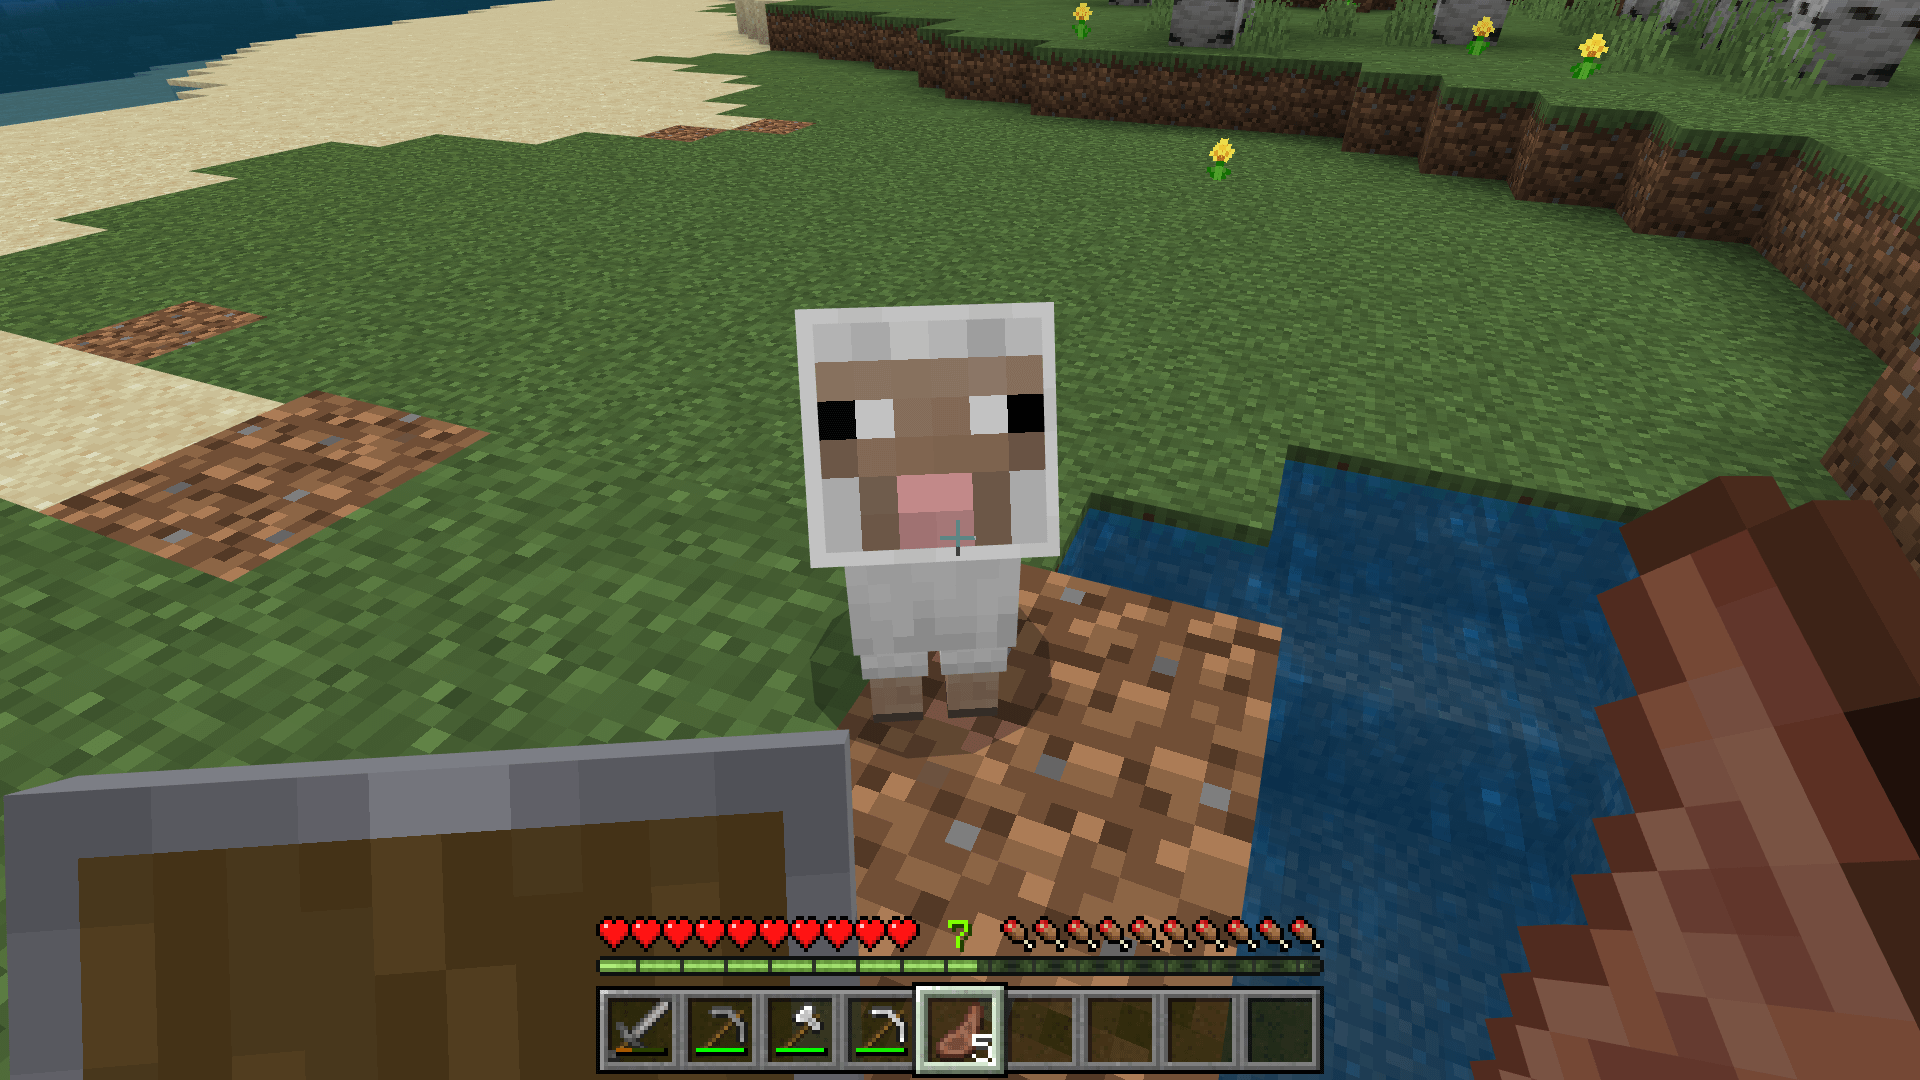 Minecraft Memes - "Does the sheep even know?"